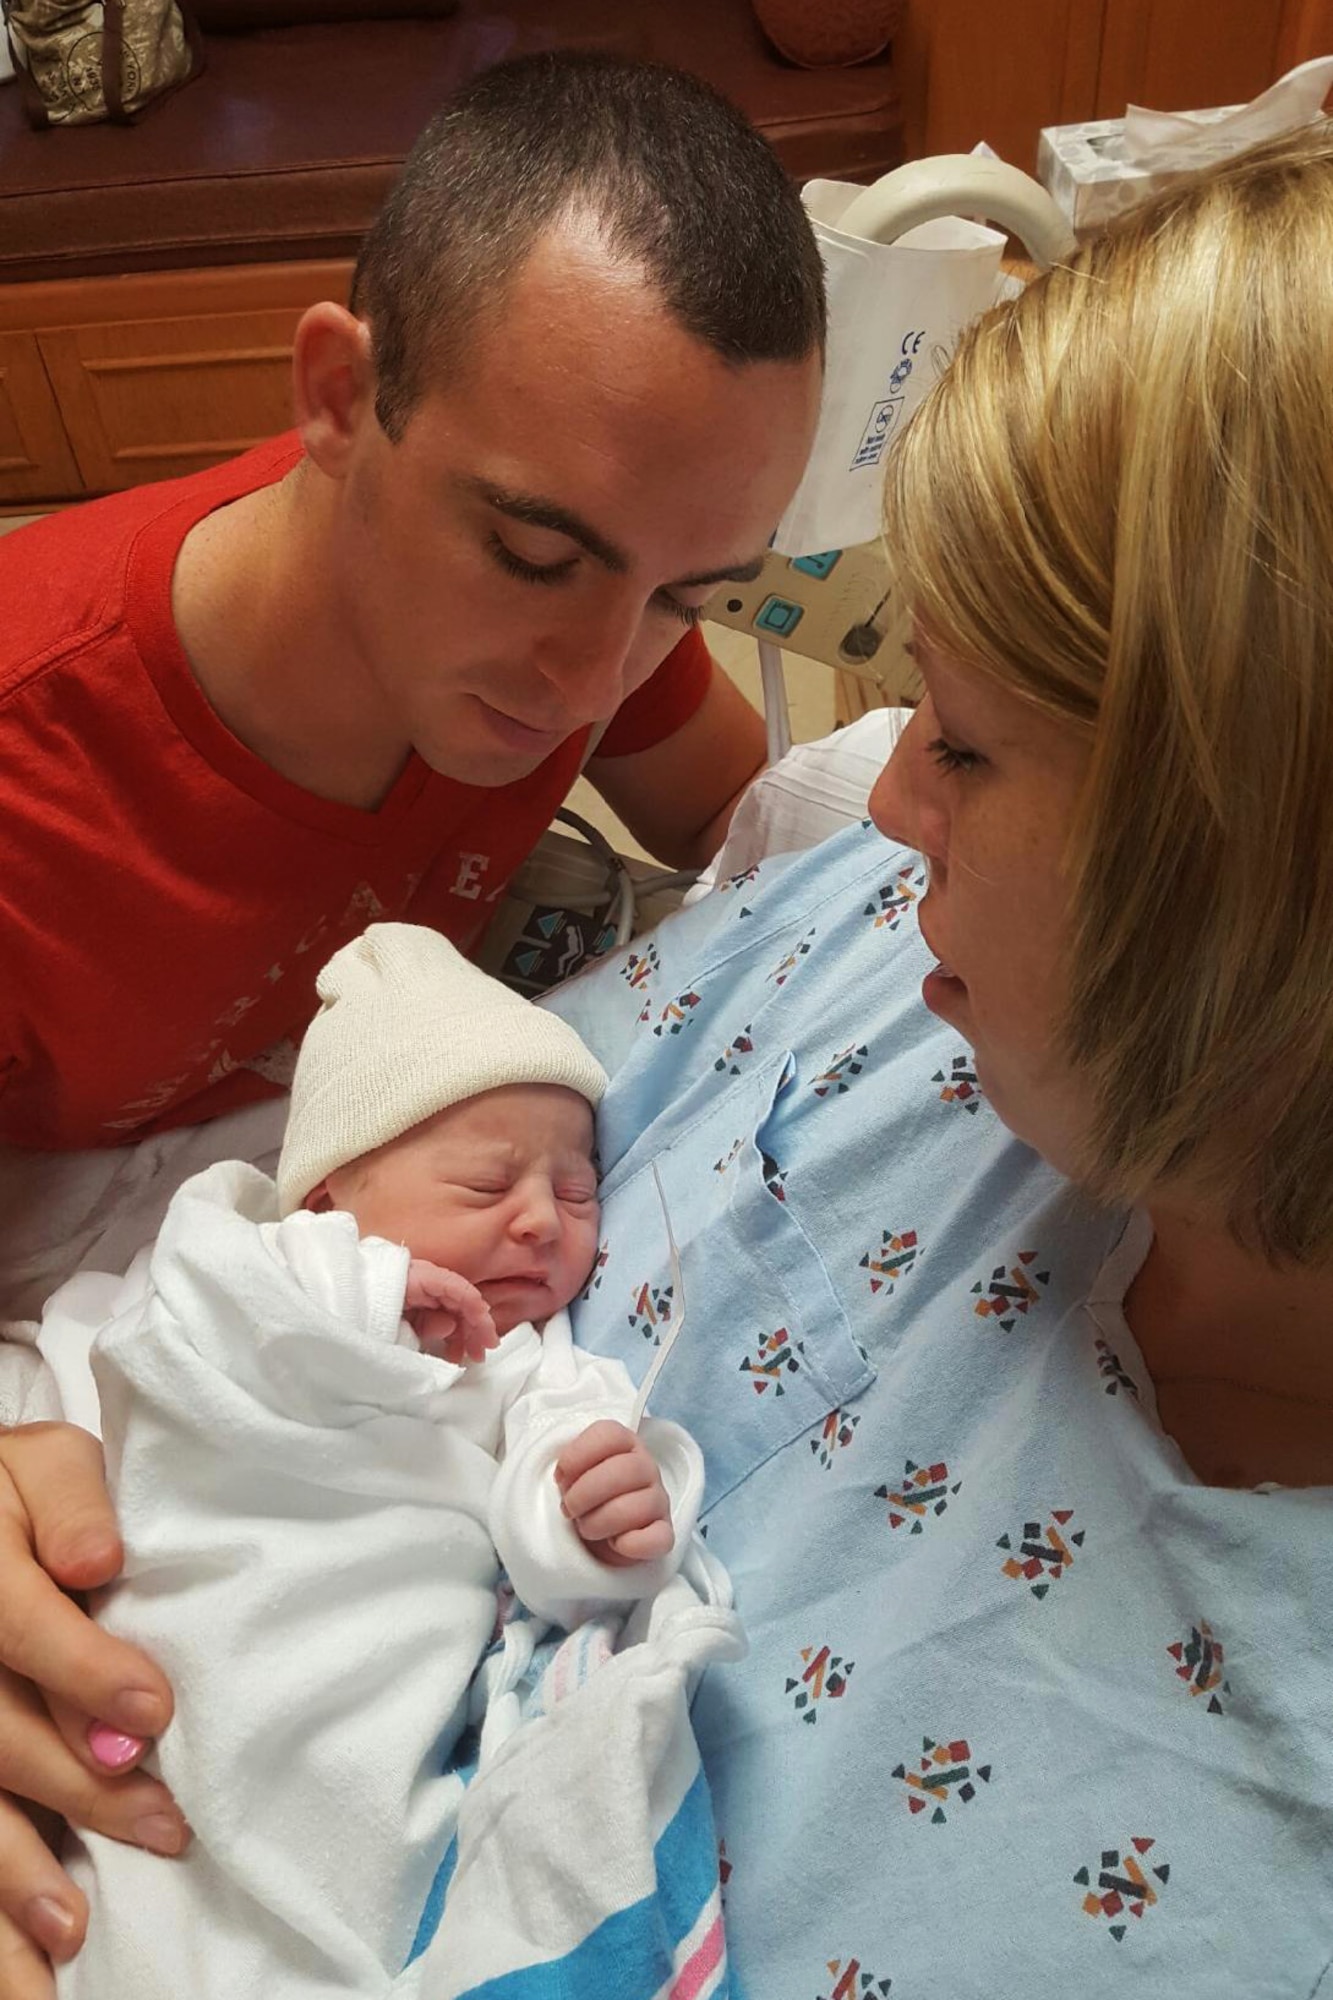 Airman 1st Class Travis Beihl, 81st Training Wing Public Affairs photojournalist, and wife Erin hold their daughter Mackenzie in the mother/baby suite at Memorial Hospital in Gulfport, Miss. Aug. 22, 2016. Mackenzie was born at 10:29 a.m. with a weight of 6 pounds, 5 ounces and measured 17 and 3/4 inches long. (U.S. Air Force photo by Airman 1st Class Travis Beihl/Released)